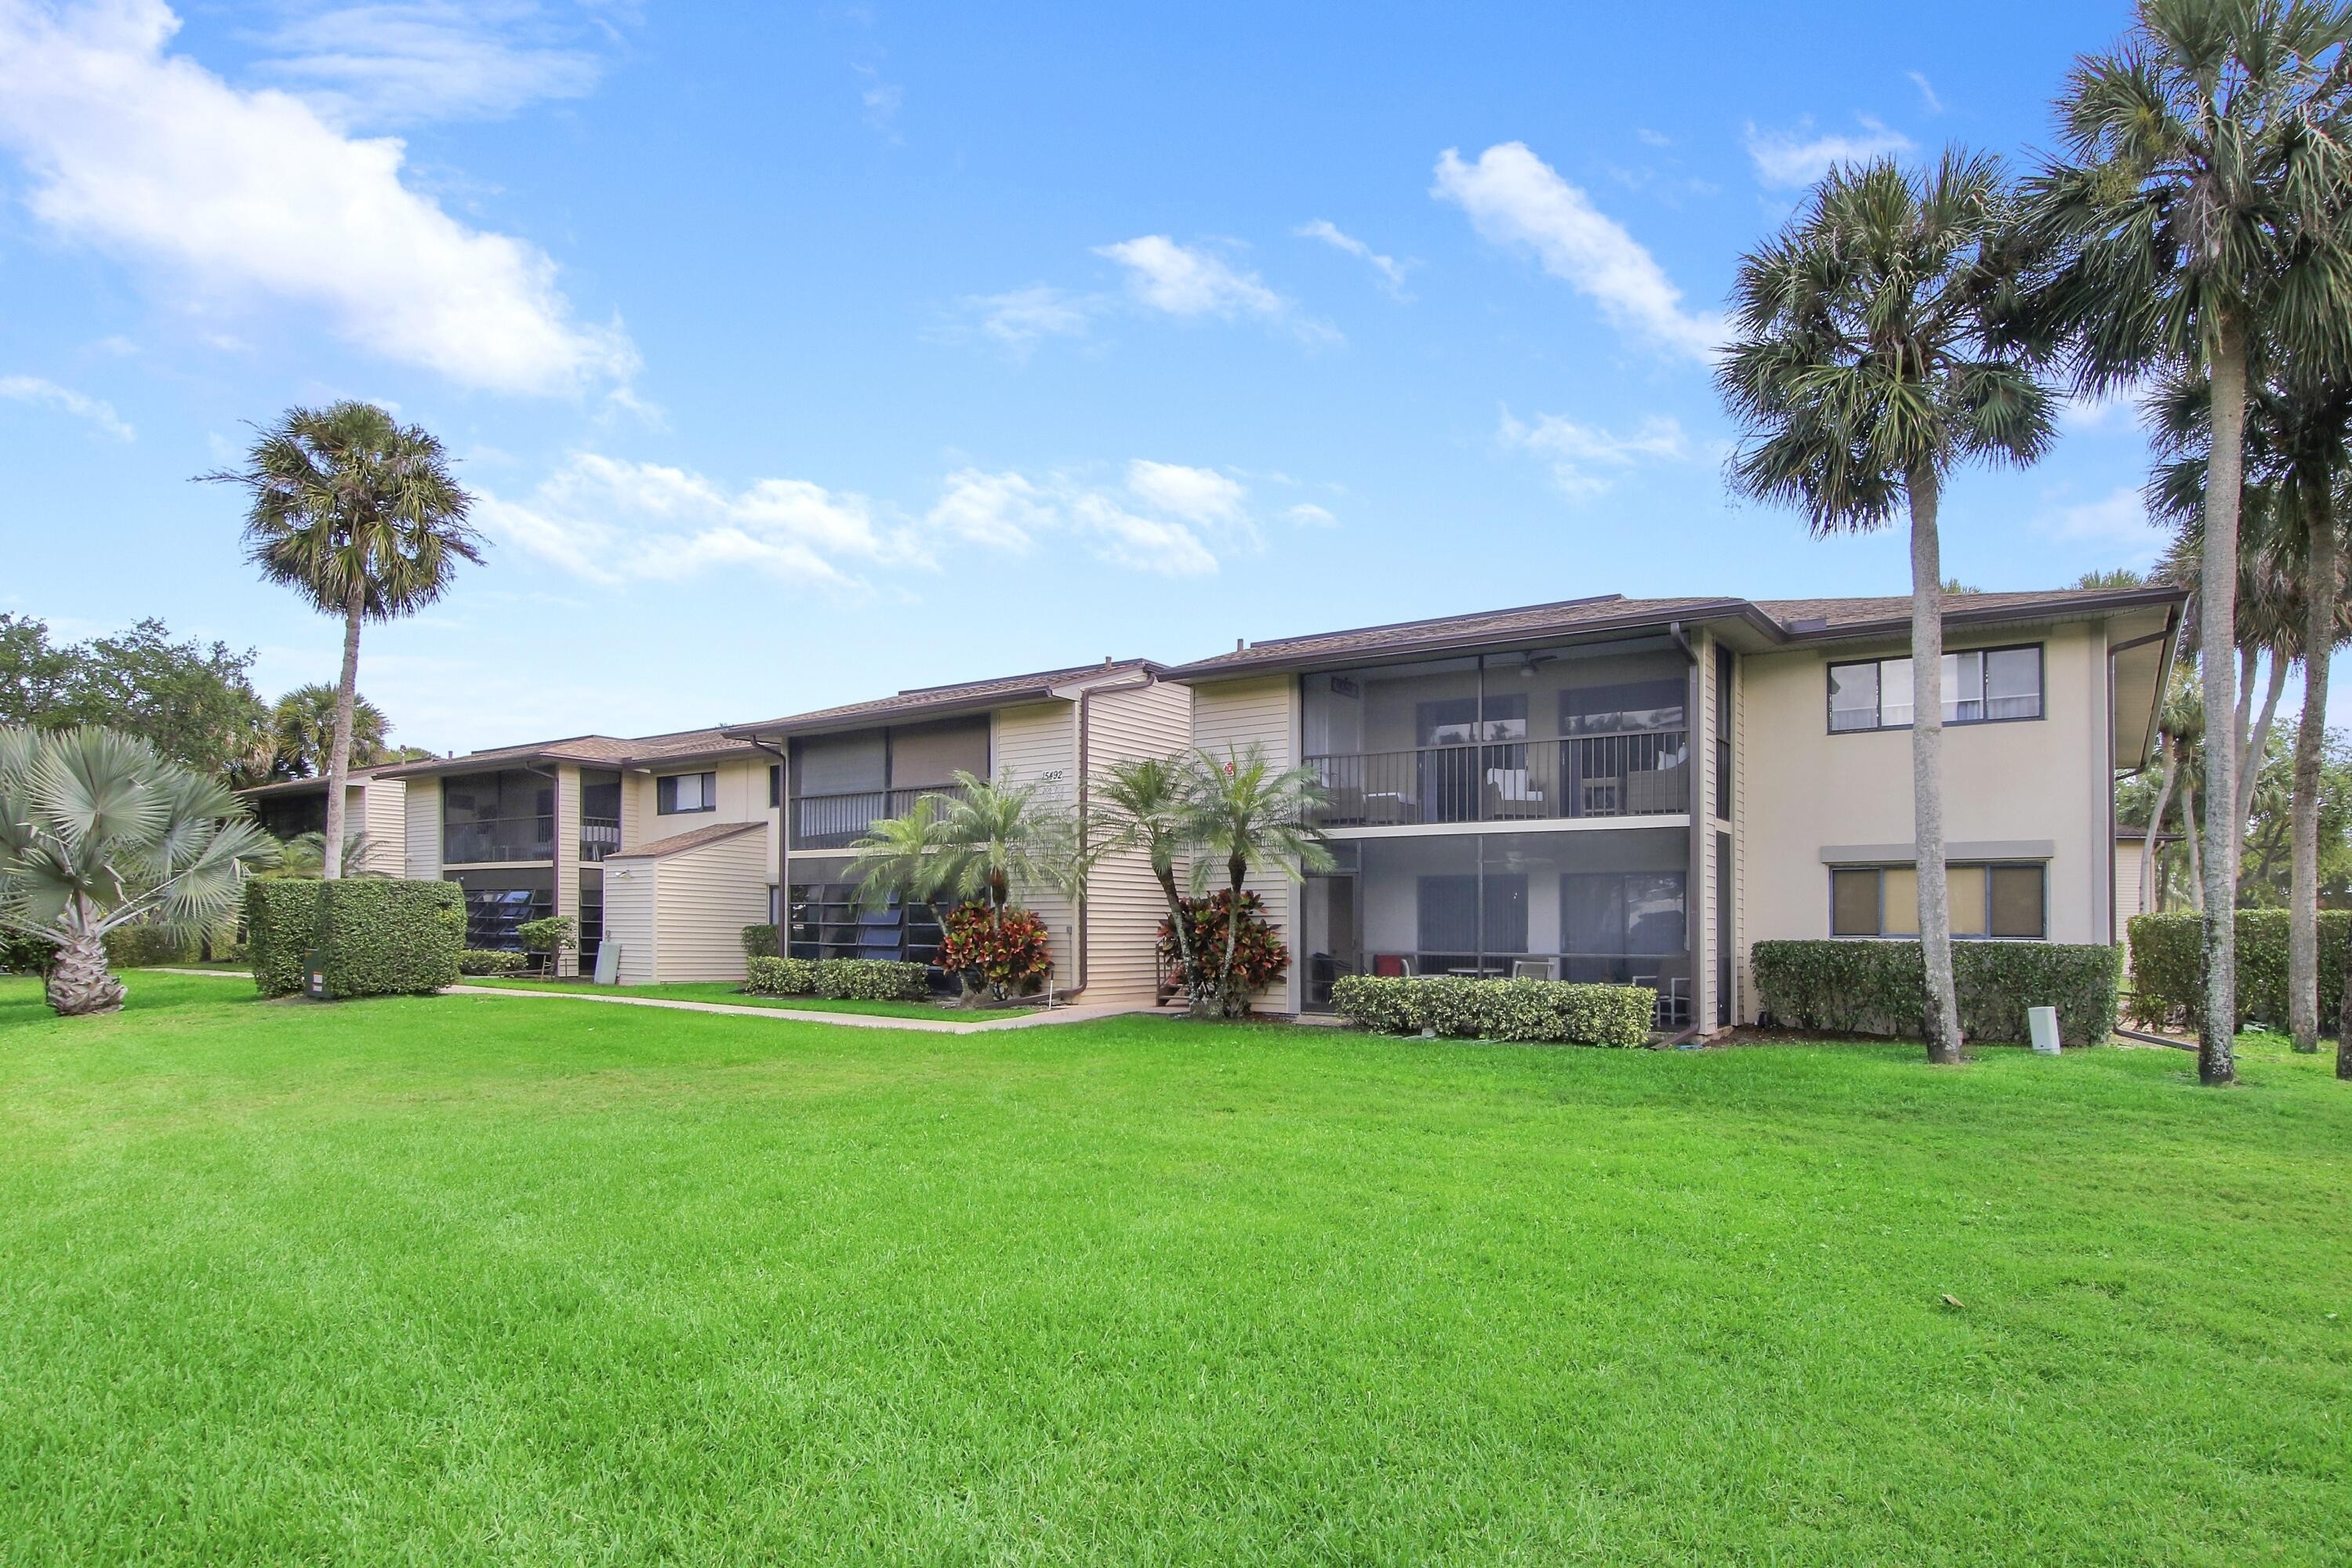 2. Condominiums for Sale at 15492 Lakes Of Delray Boulevard, 207 Lakes Of Delray, Delray Beach, FL 33484